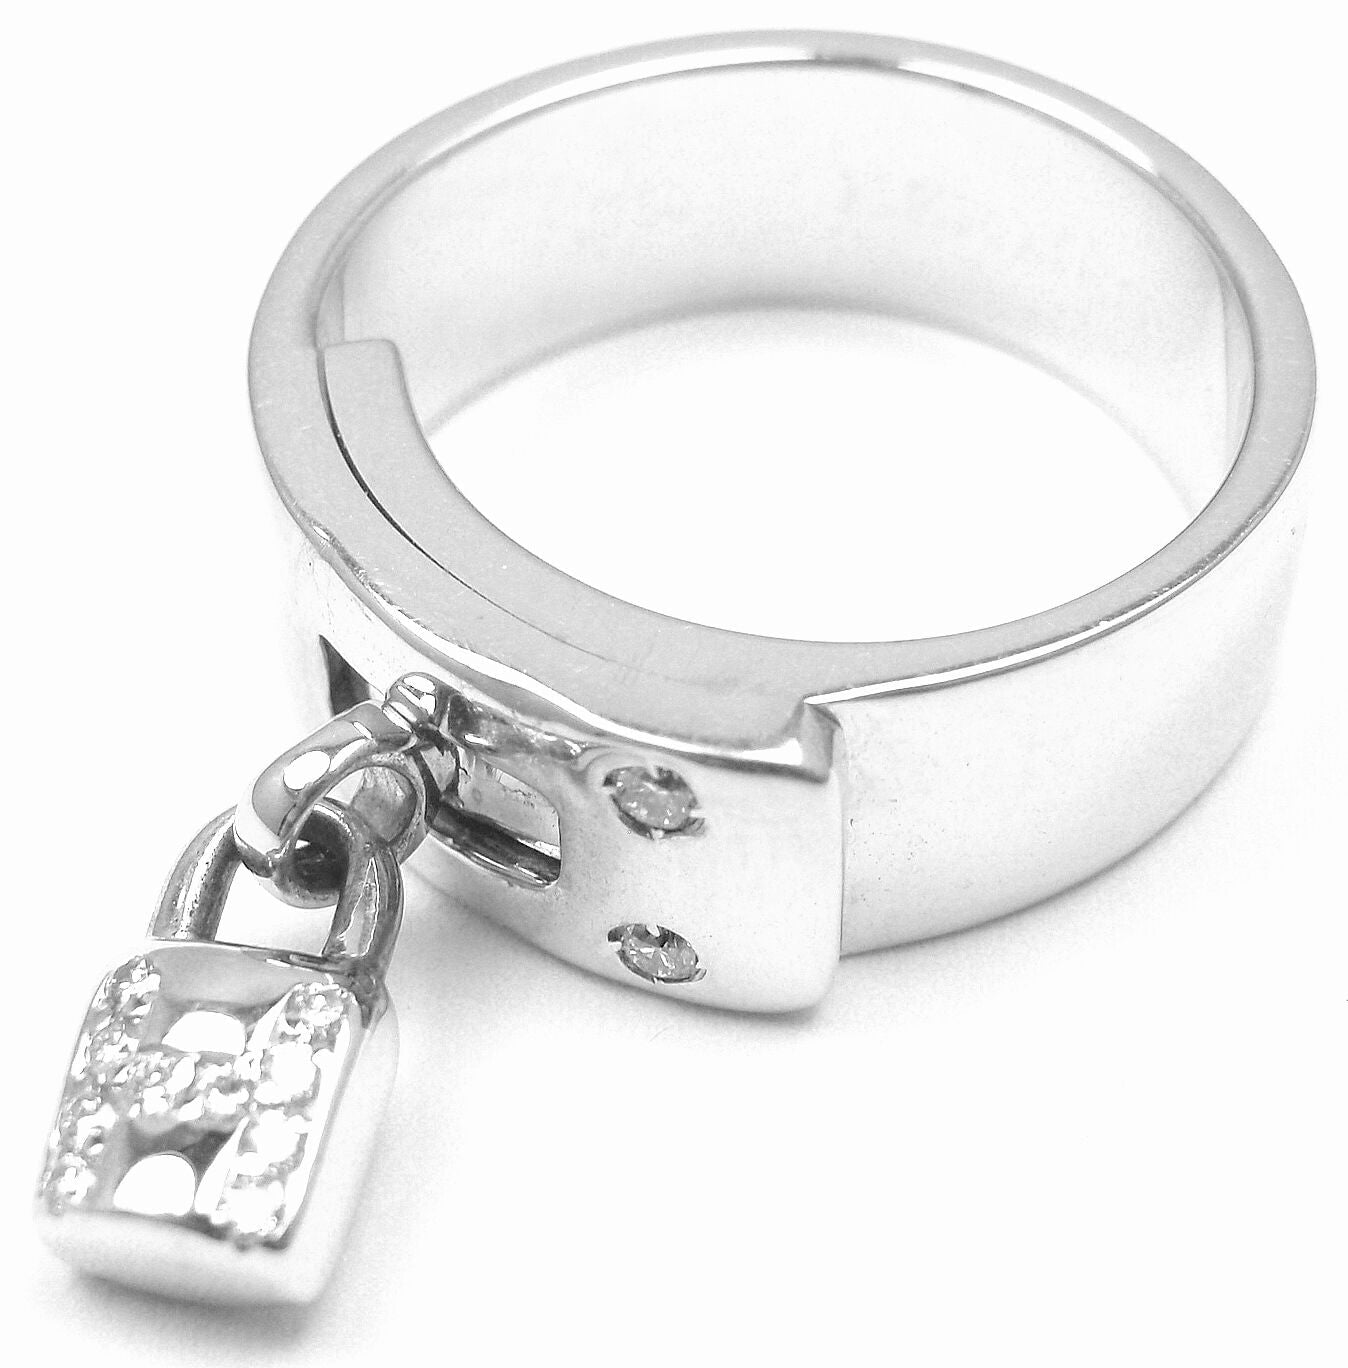 Hermes Jewelry & Watches:Fine Jewelry:Rings Authentic! Hermes 18k White Gold Diamond "H" Lock Band Ring Size 5